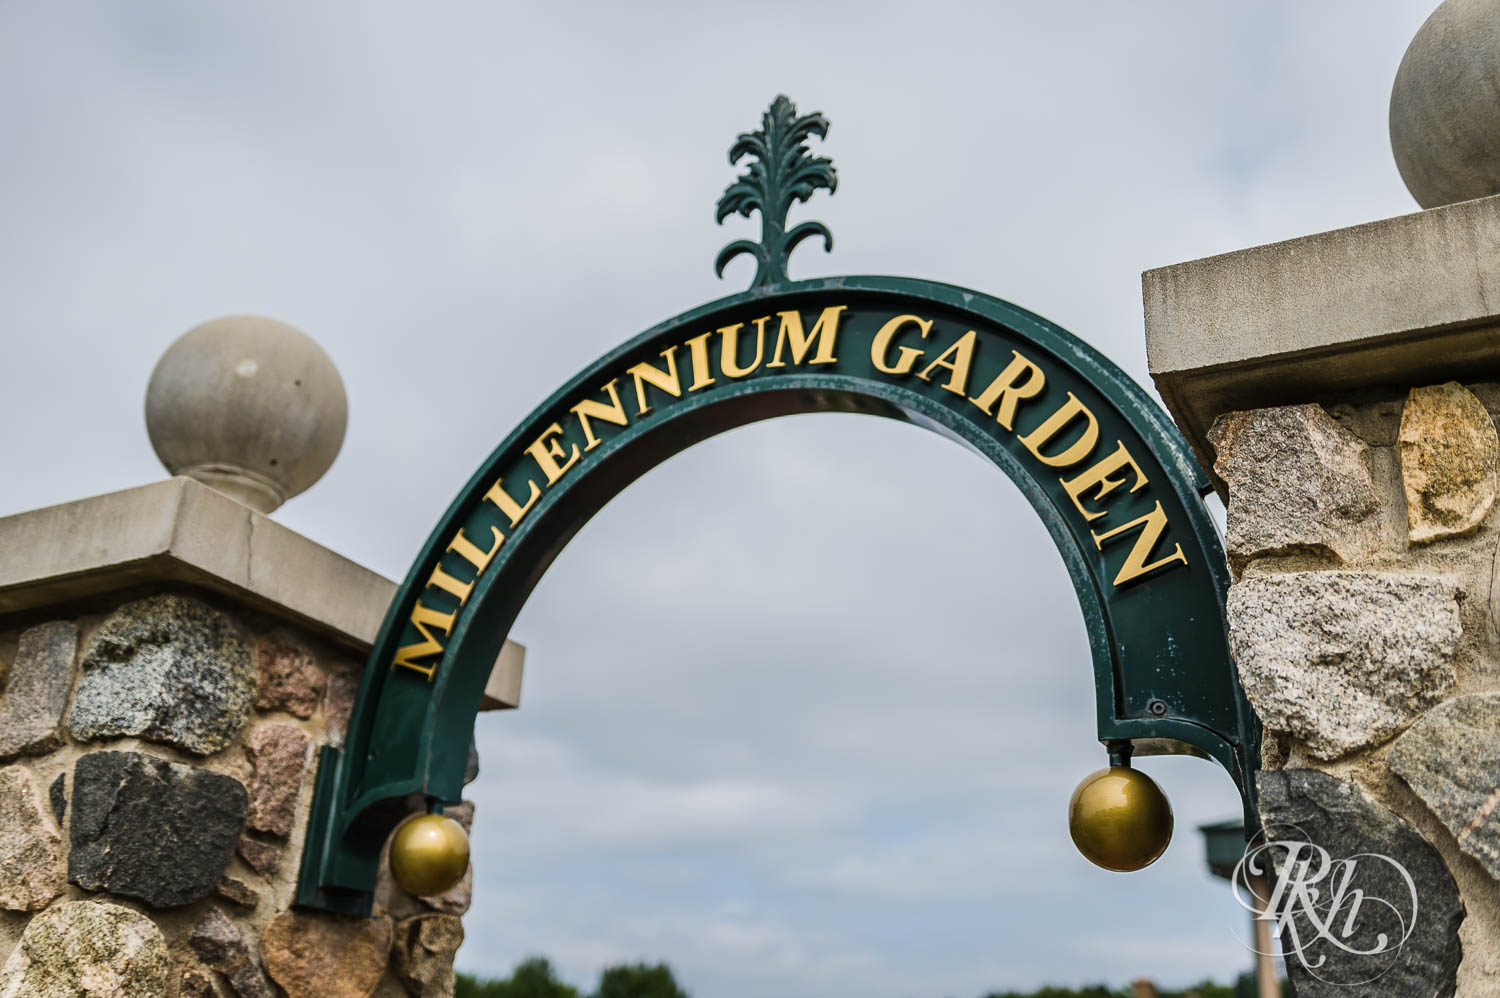 Millennium Gardens at Plymouth Creek Center in Plymouth, Minnesota.